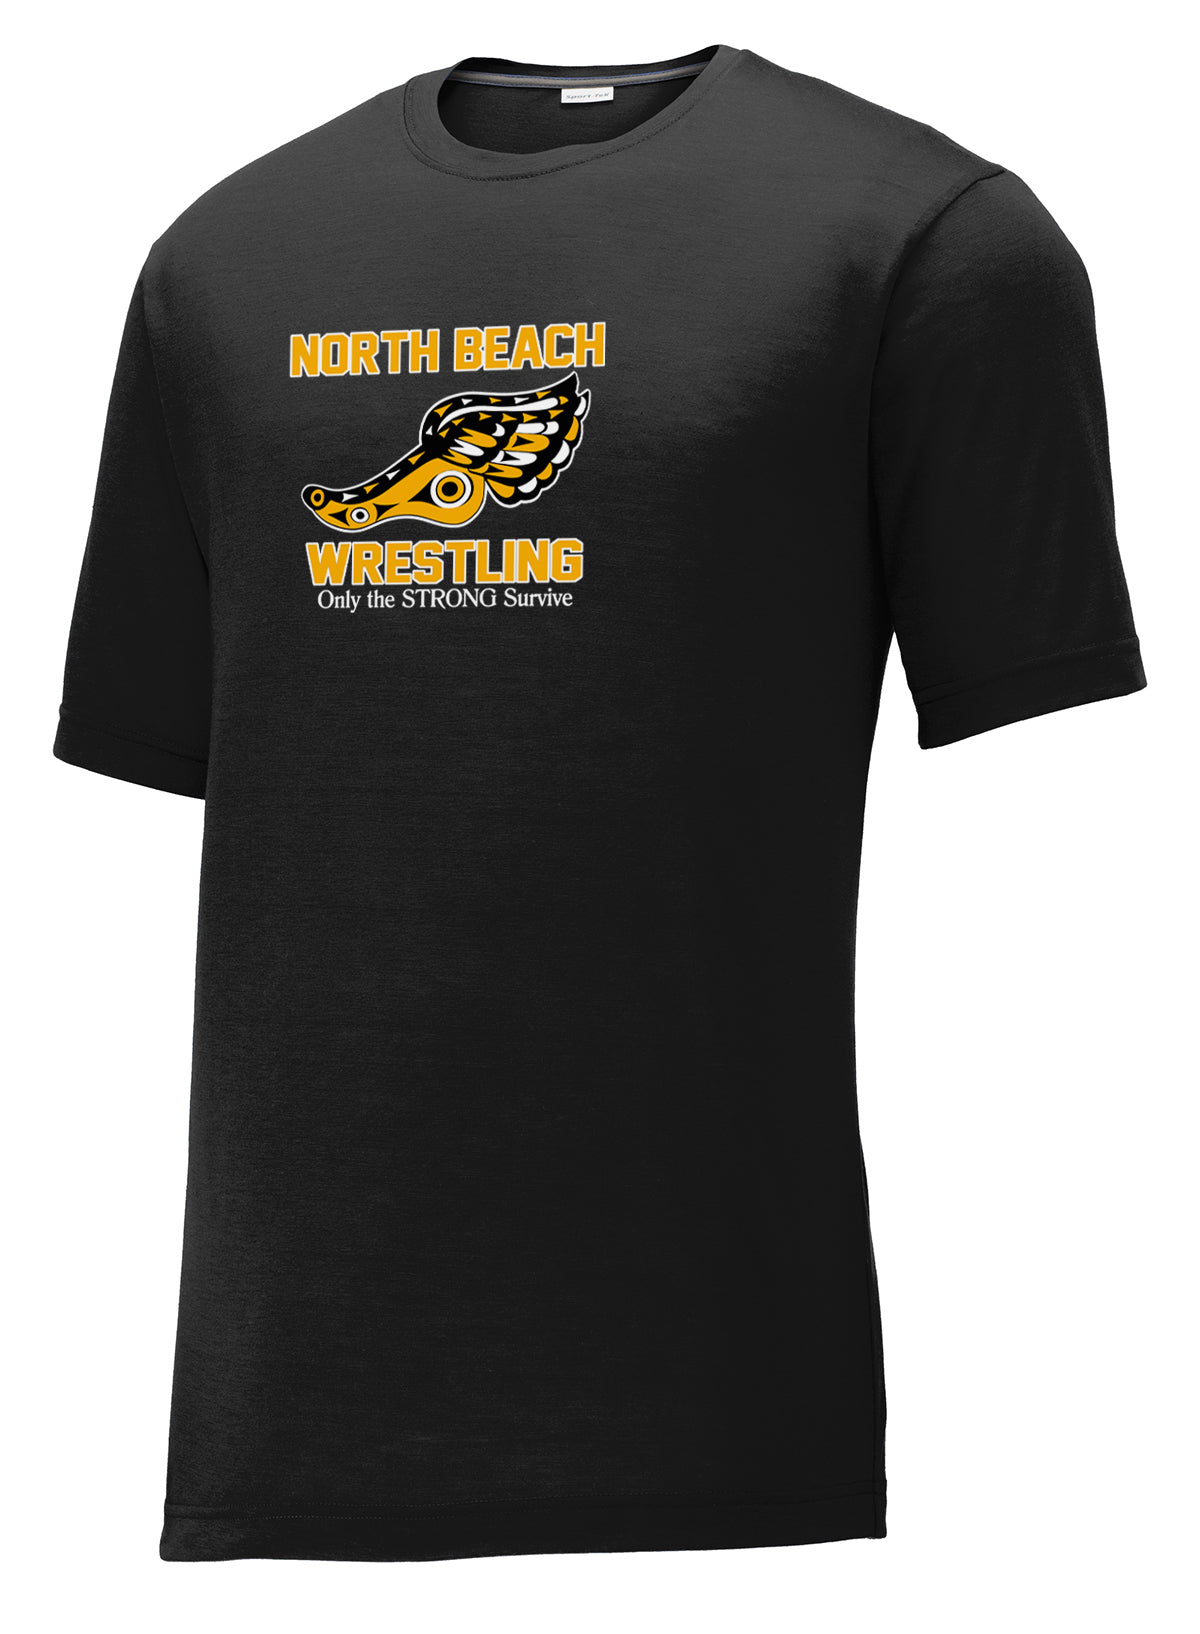 North Beach Wrestling CottonTouch Performance T-Shirt: Quote Logo